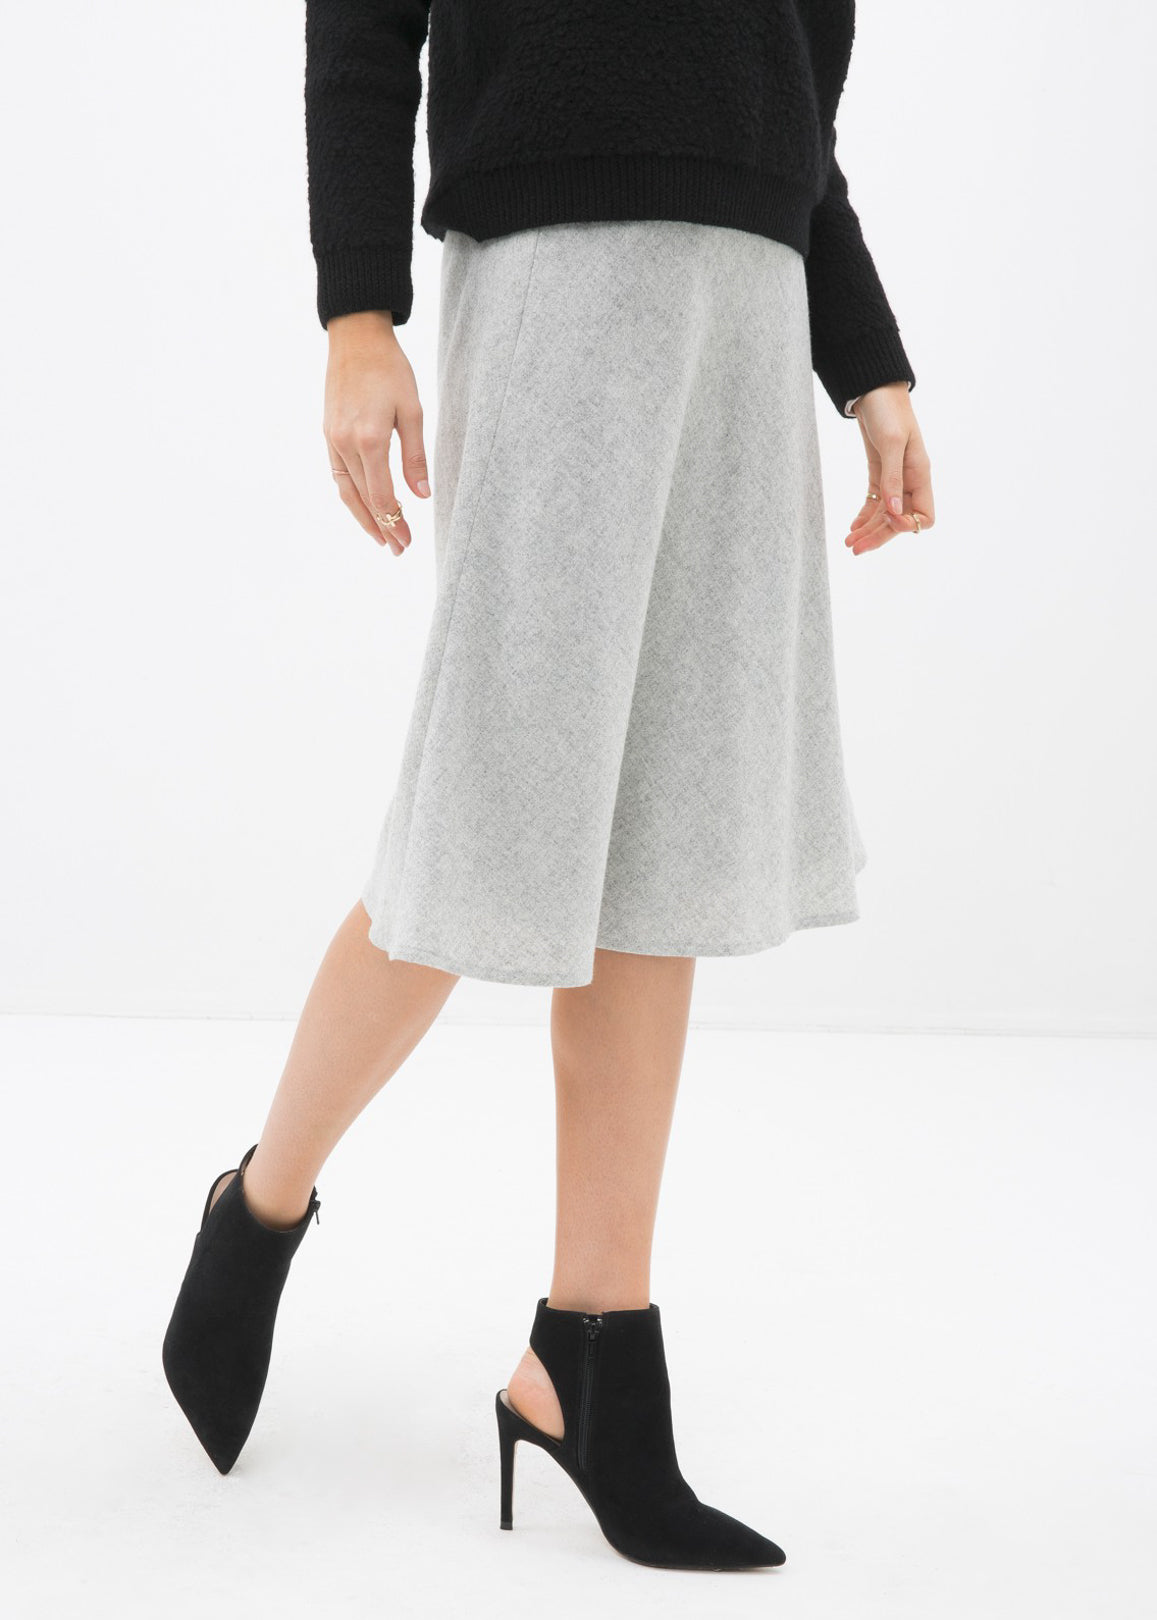 High Waisted Wool Knit Midi Skirt In Heather Grey